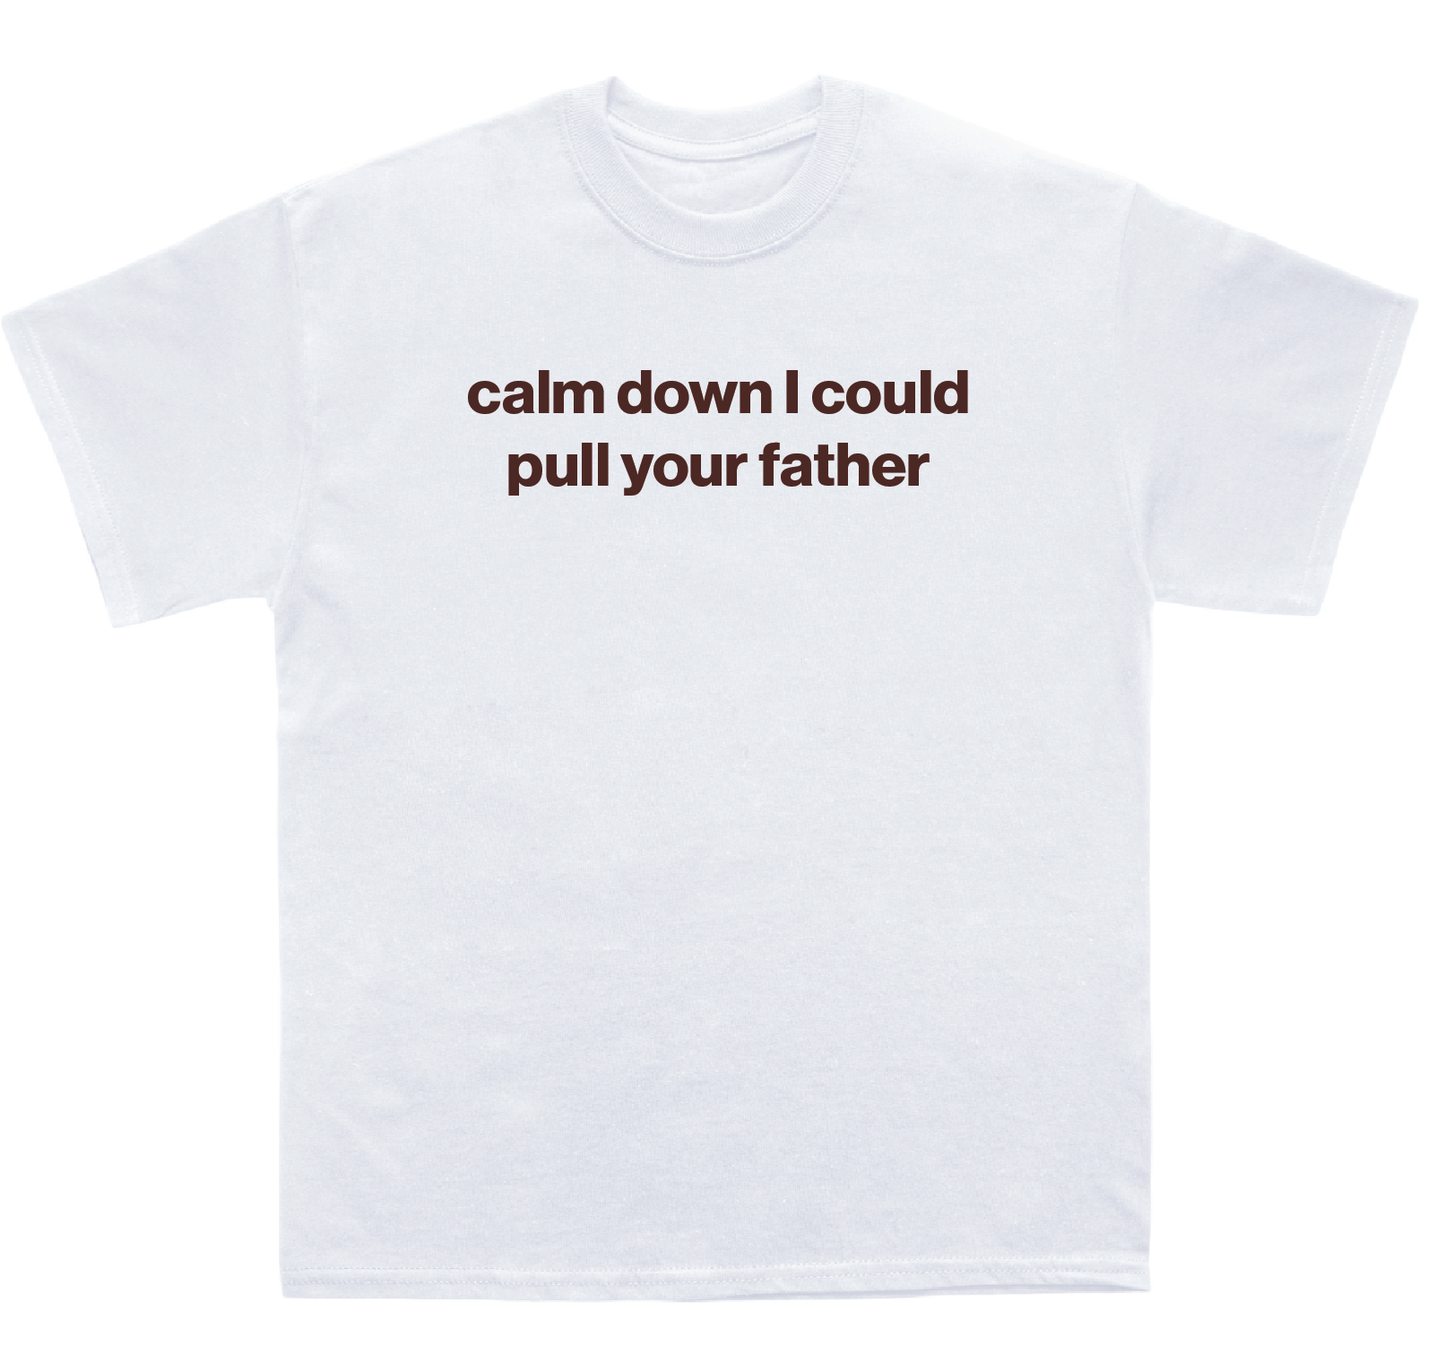 calm down I could pull your father shirt